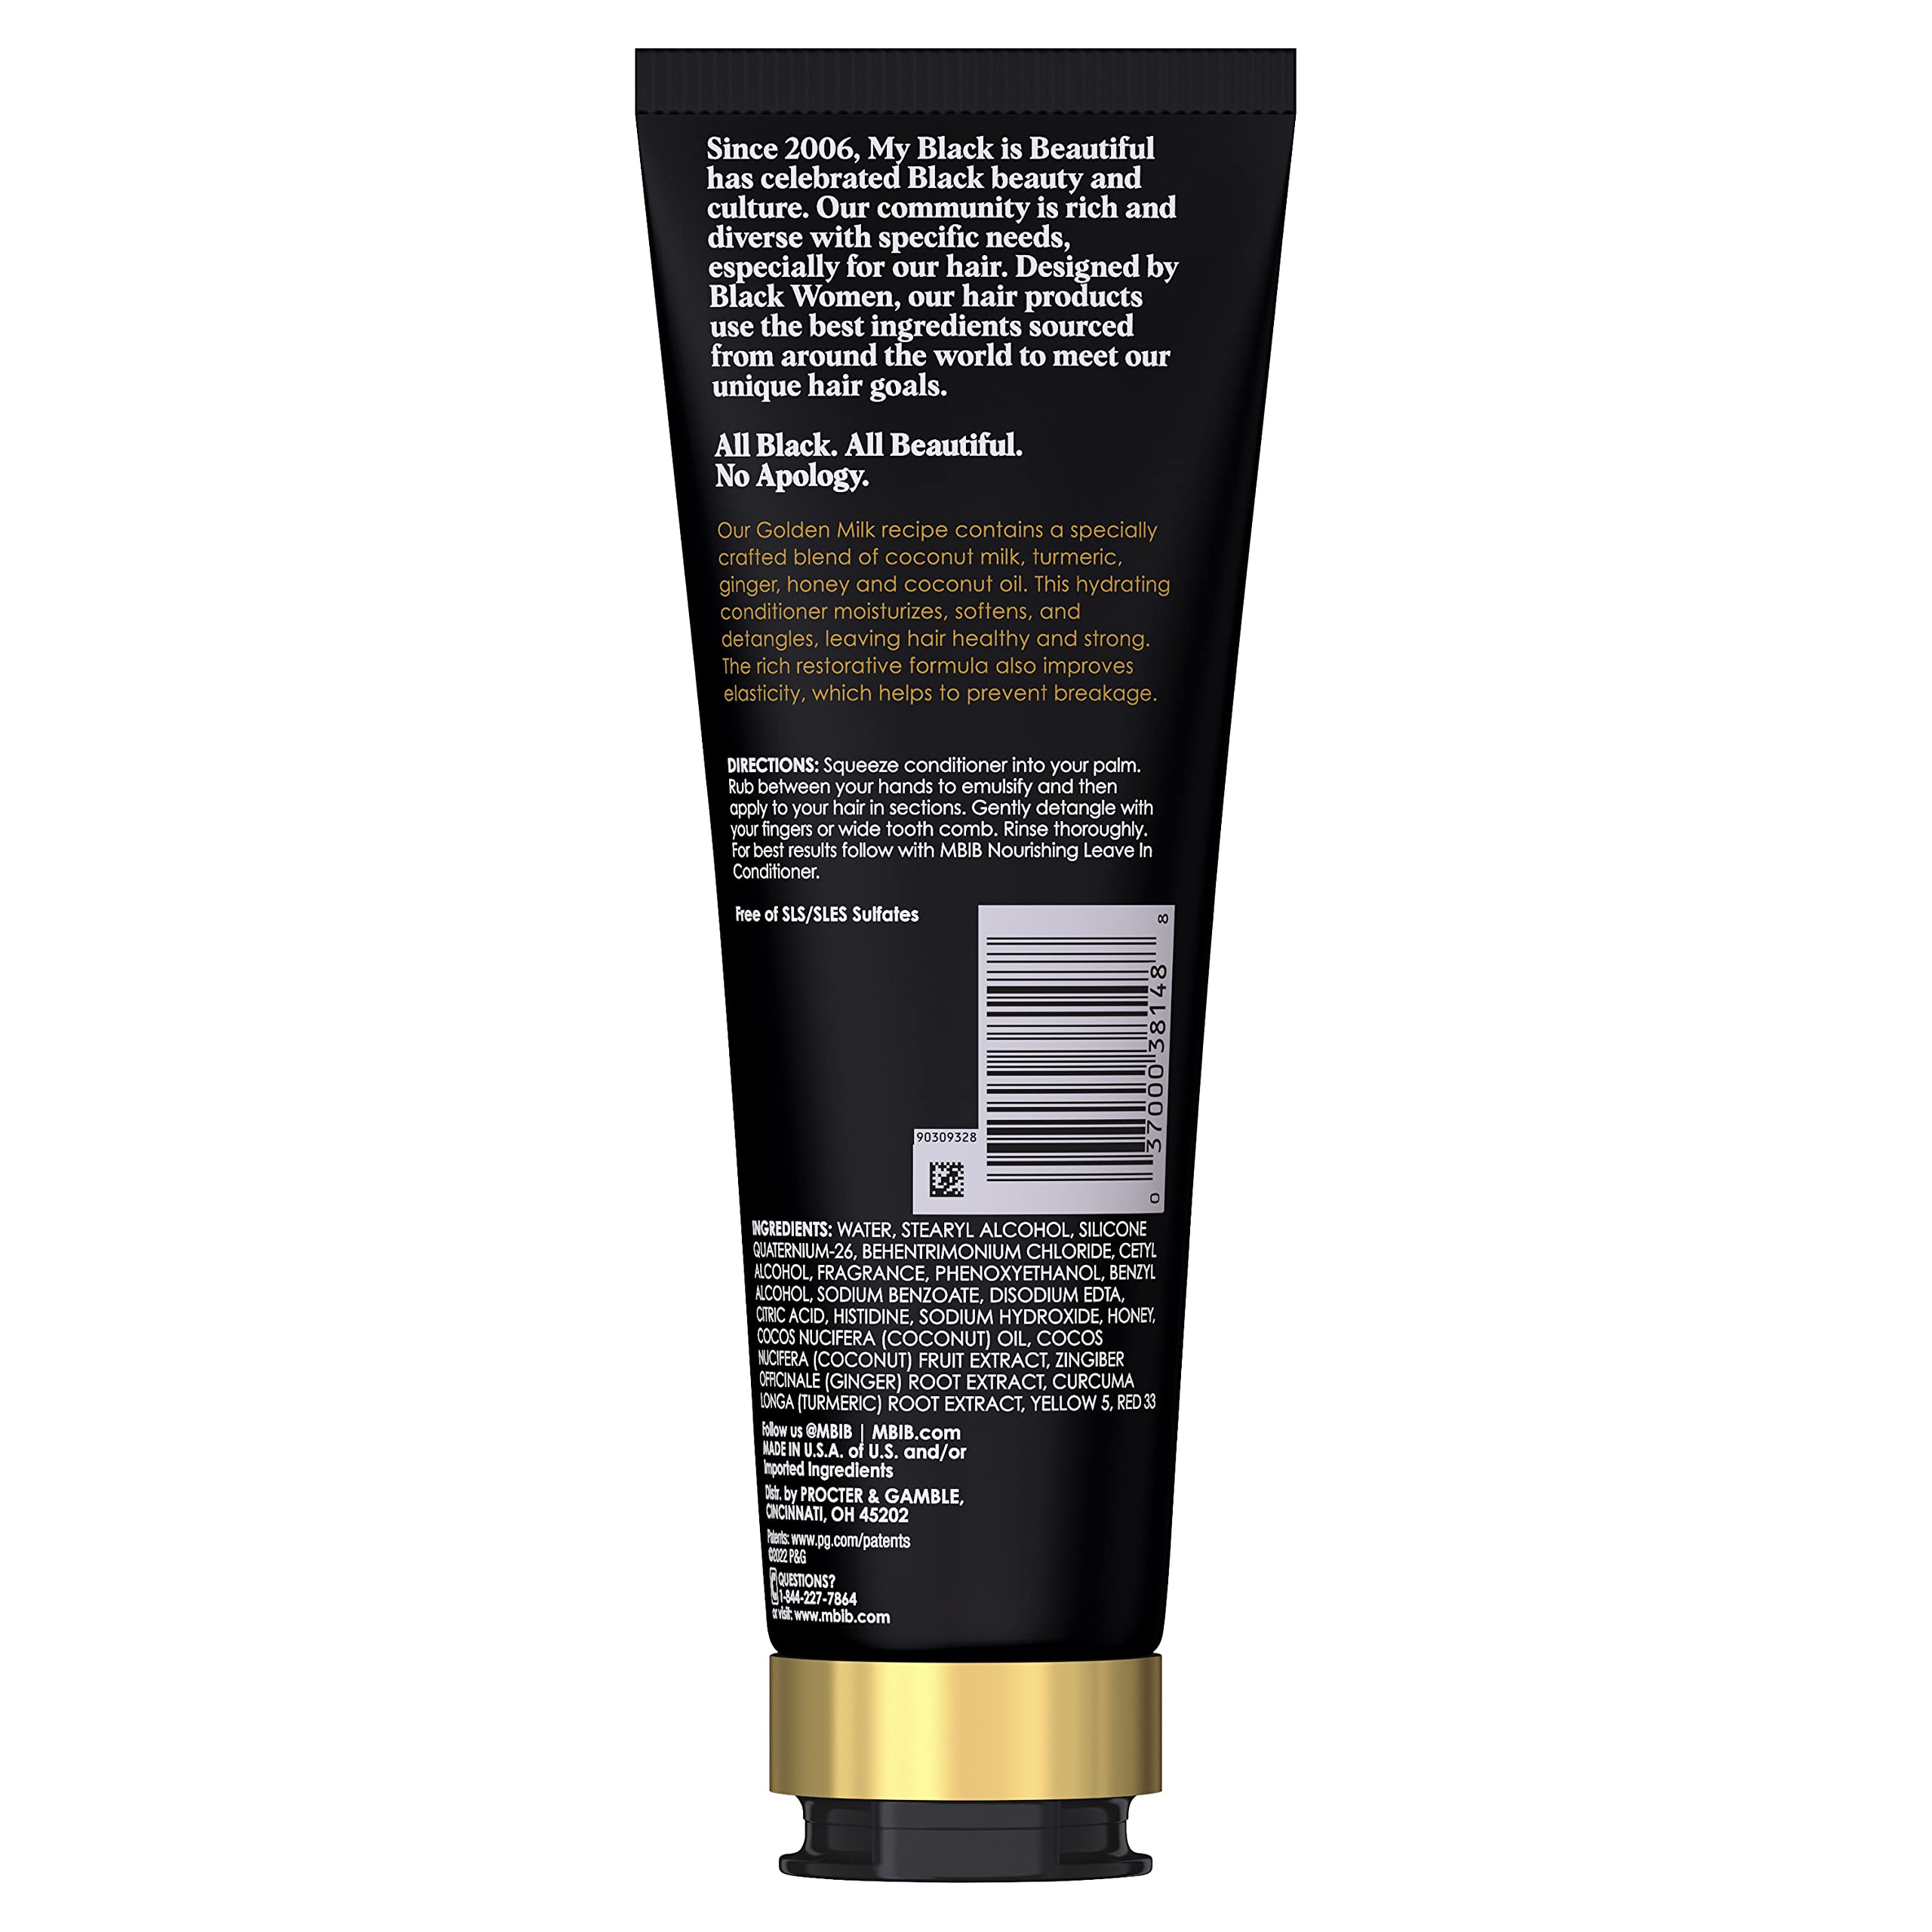 My Black is Beautiful Golden Milk Fortifying Conditioner, 8.4 Fl Oz — Sulfate Free, Moisturizing Conditioner for Curly and Coily Hair with Coconut Oil, Honey, and Turmeric (Packaging May Vary)